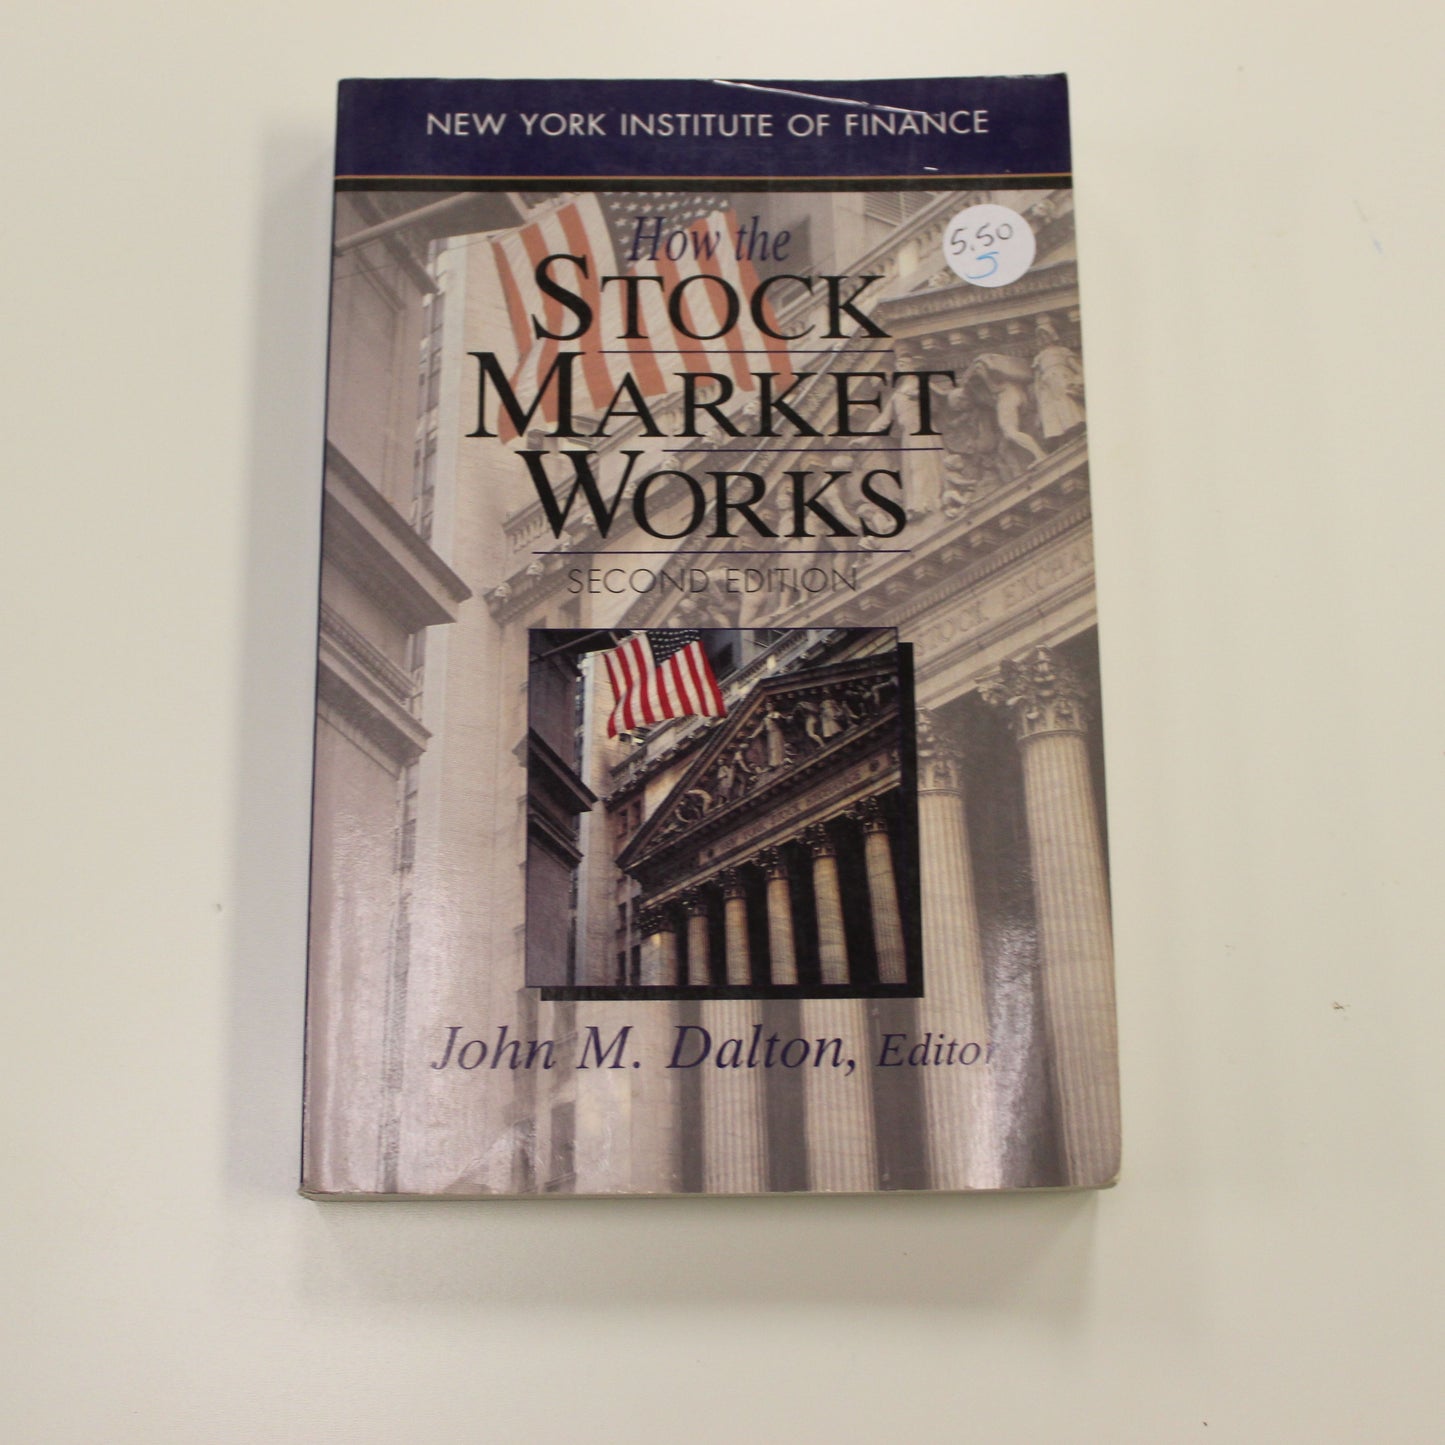 HOW THE STOCK MARKET WORKS 2ND EDITION